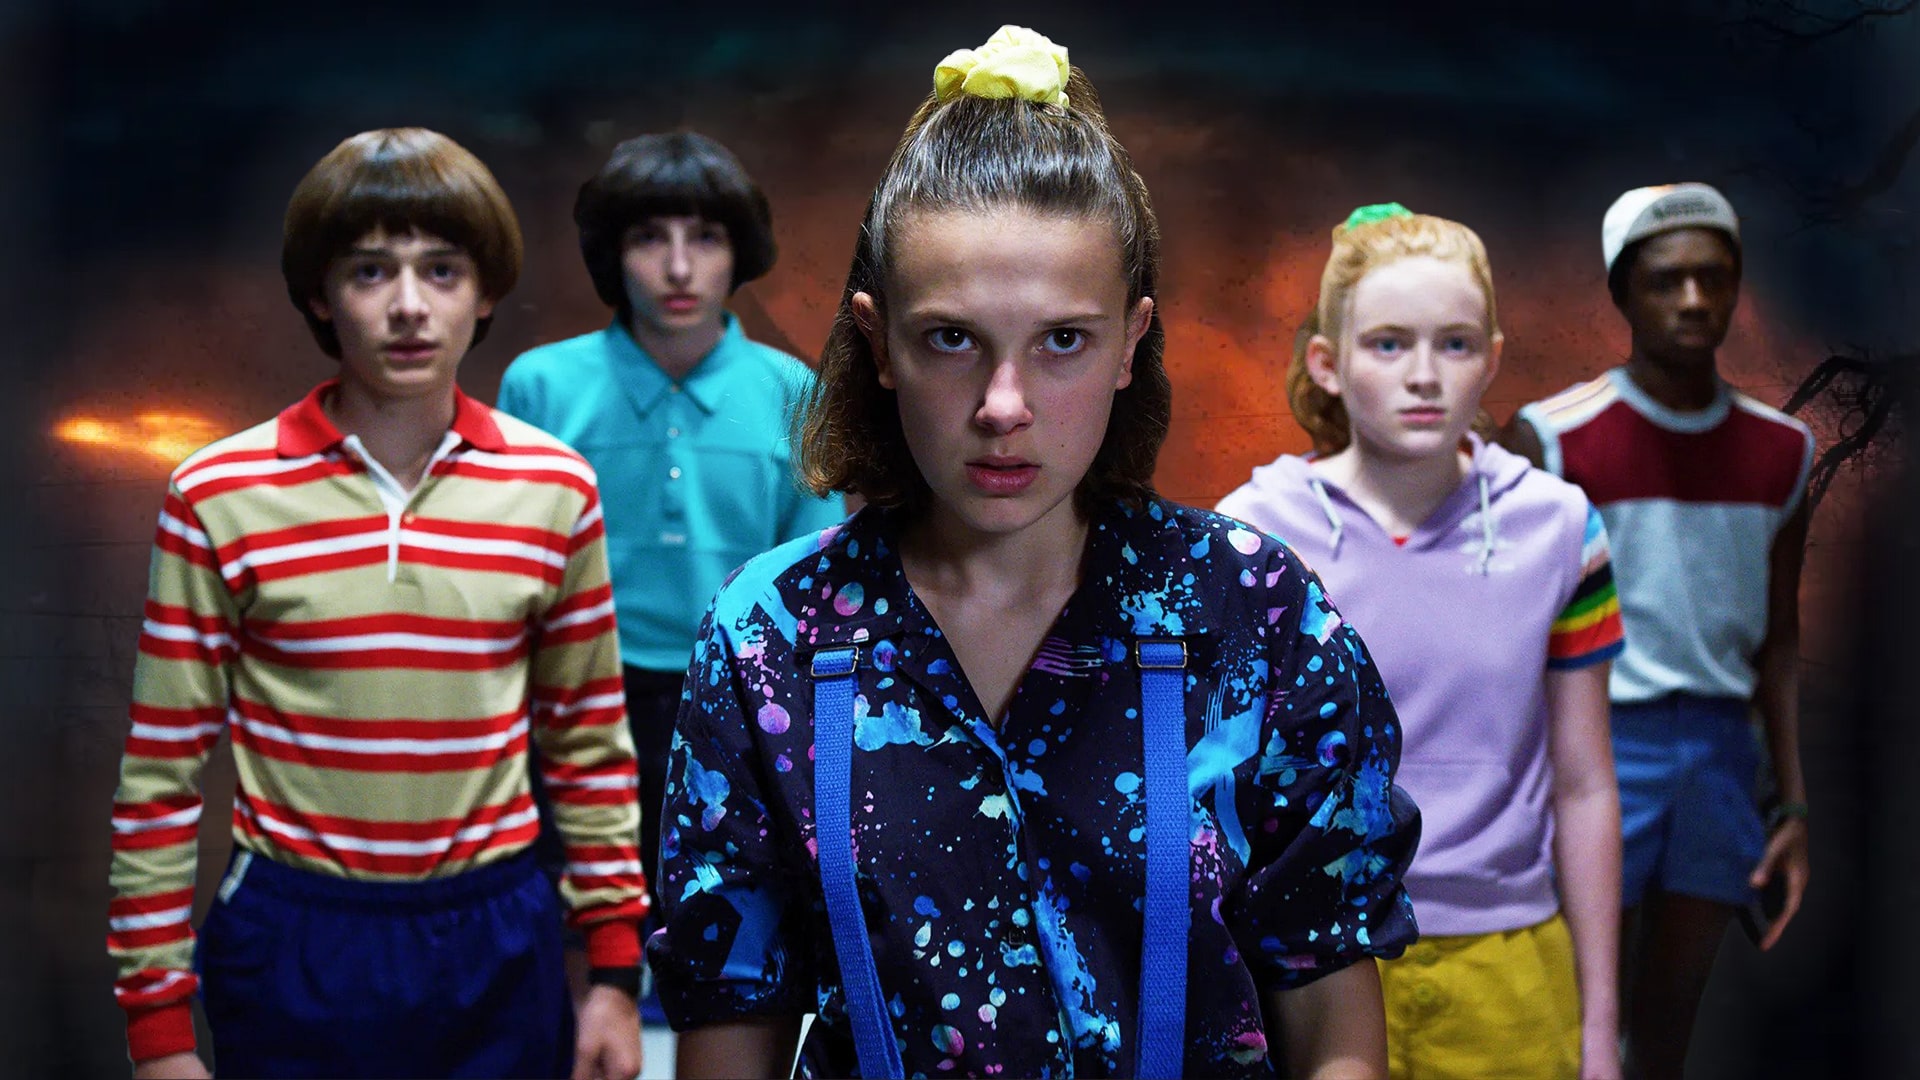 Stranger Things Facts - 100 Stranger Things Facts You Haven’t Read Before